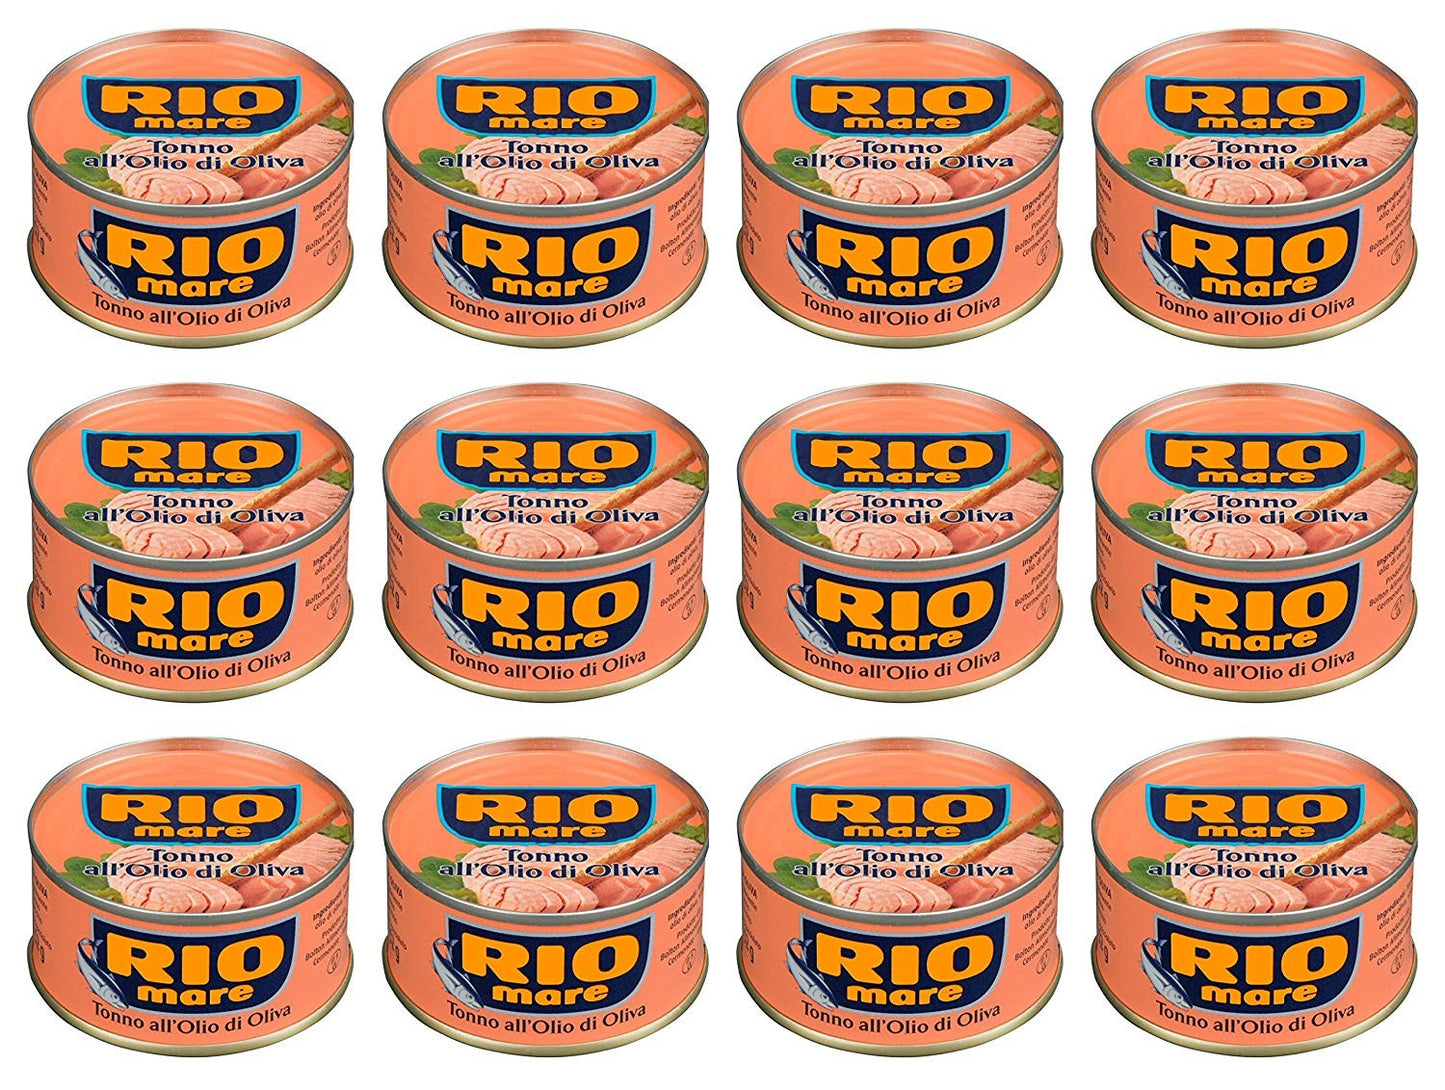 Rio Mare: Set of 12 Cans of Tuna Fish in Olive Oil, Yellowfin Tuna Quality  Pack of 12, 80g (2.82oz)  960g